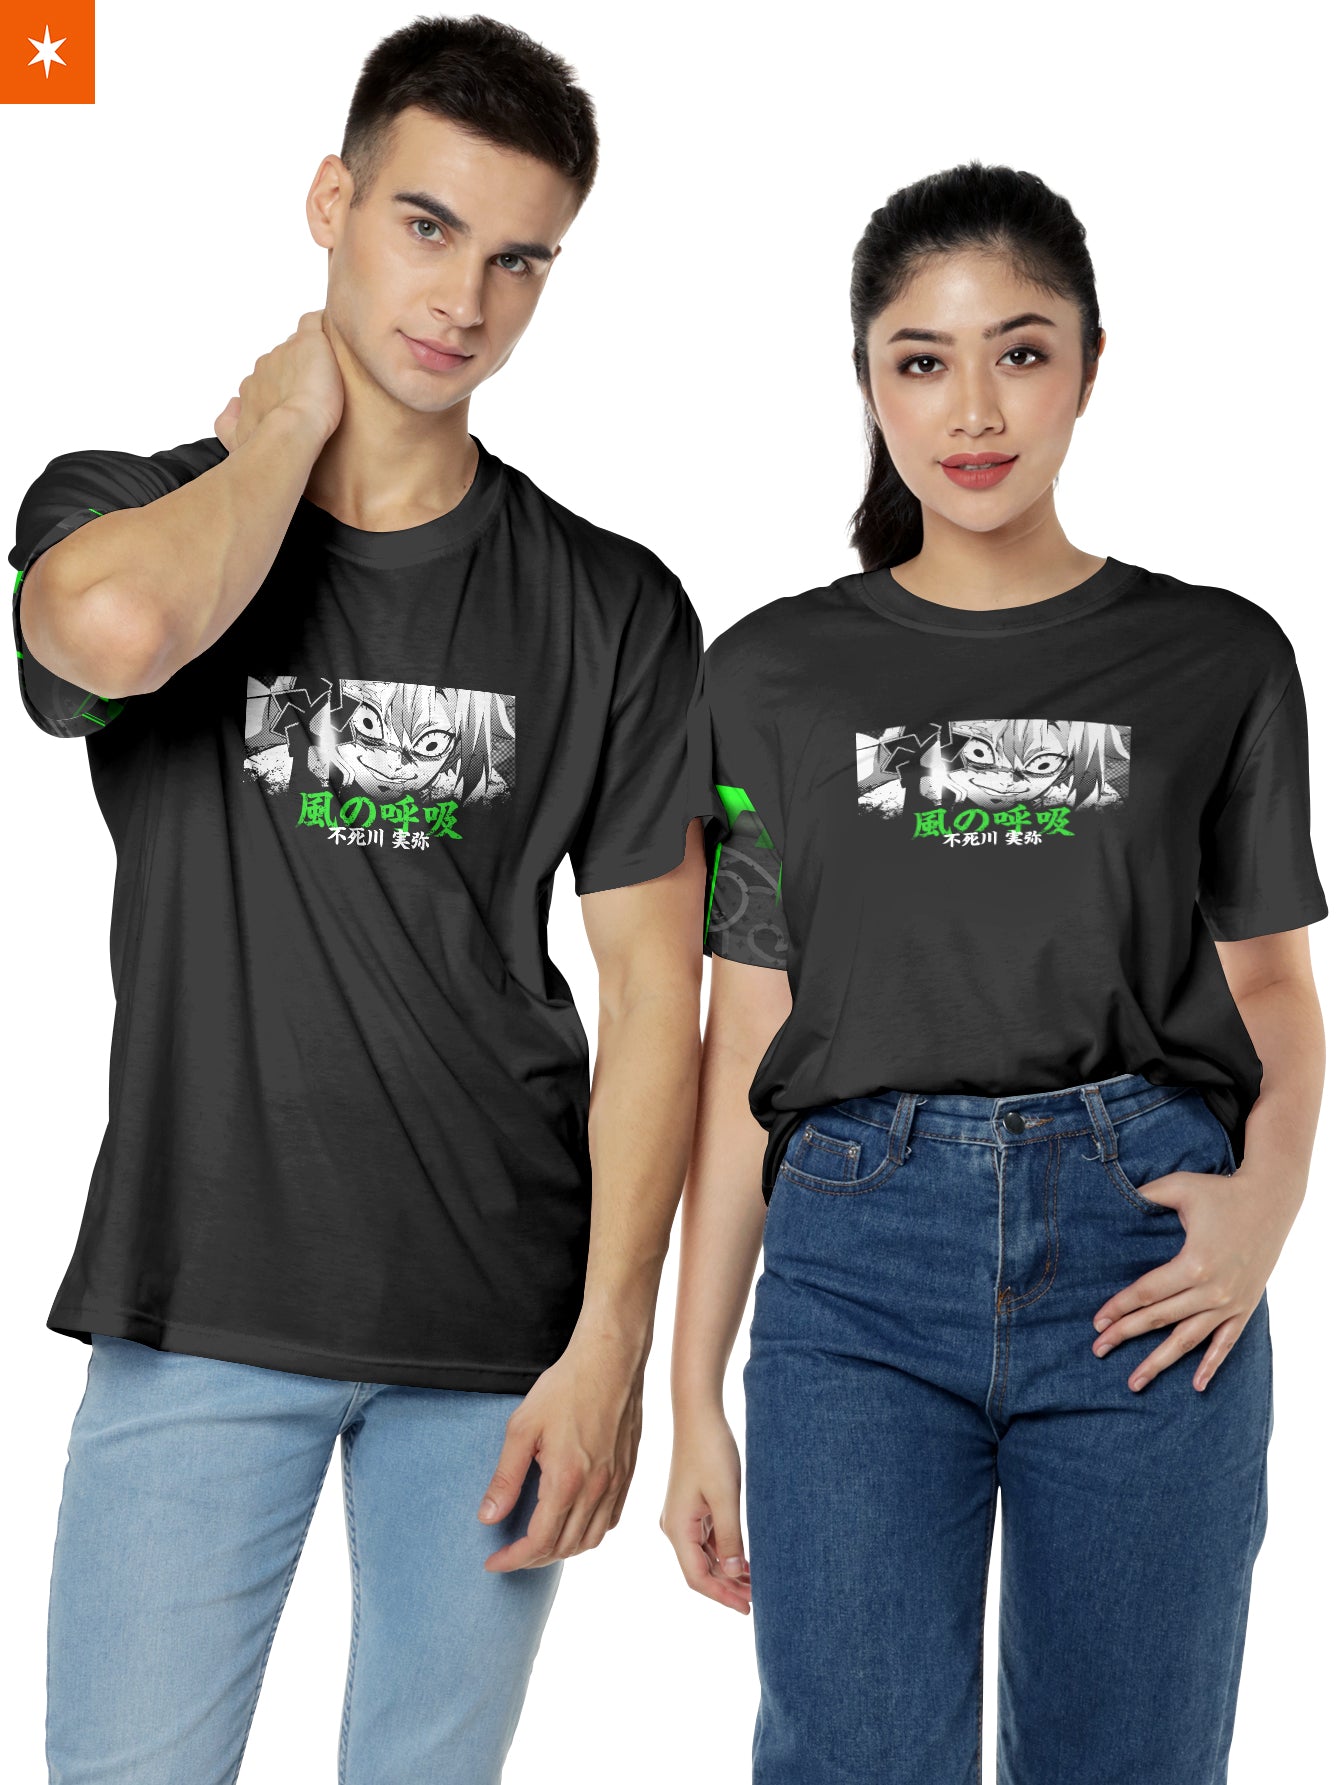 Resilient Fighter Unisex T-Shirt